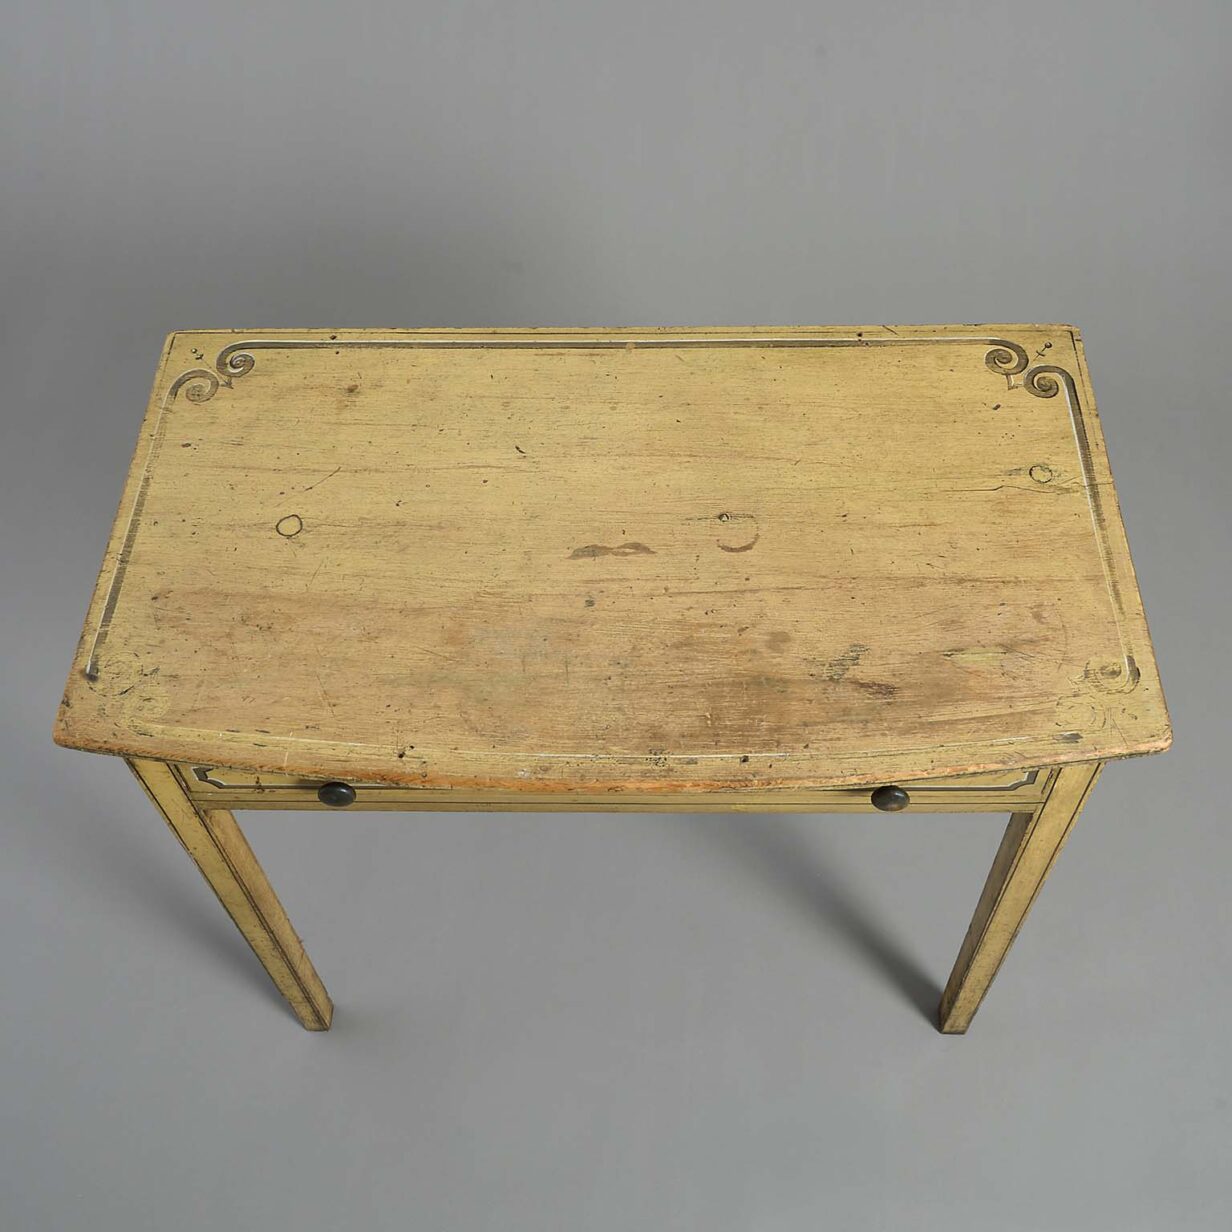 Early 19th century regency period side table